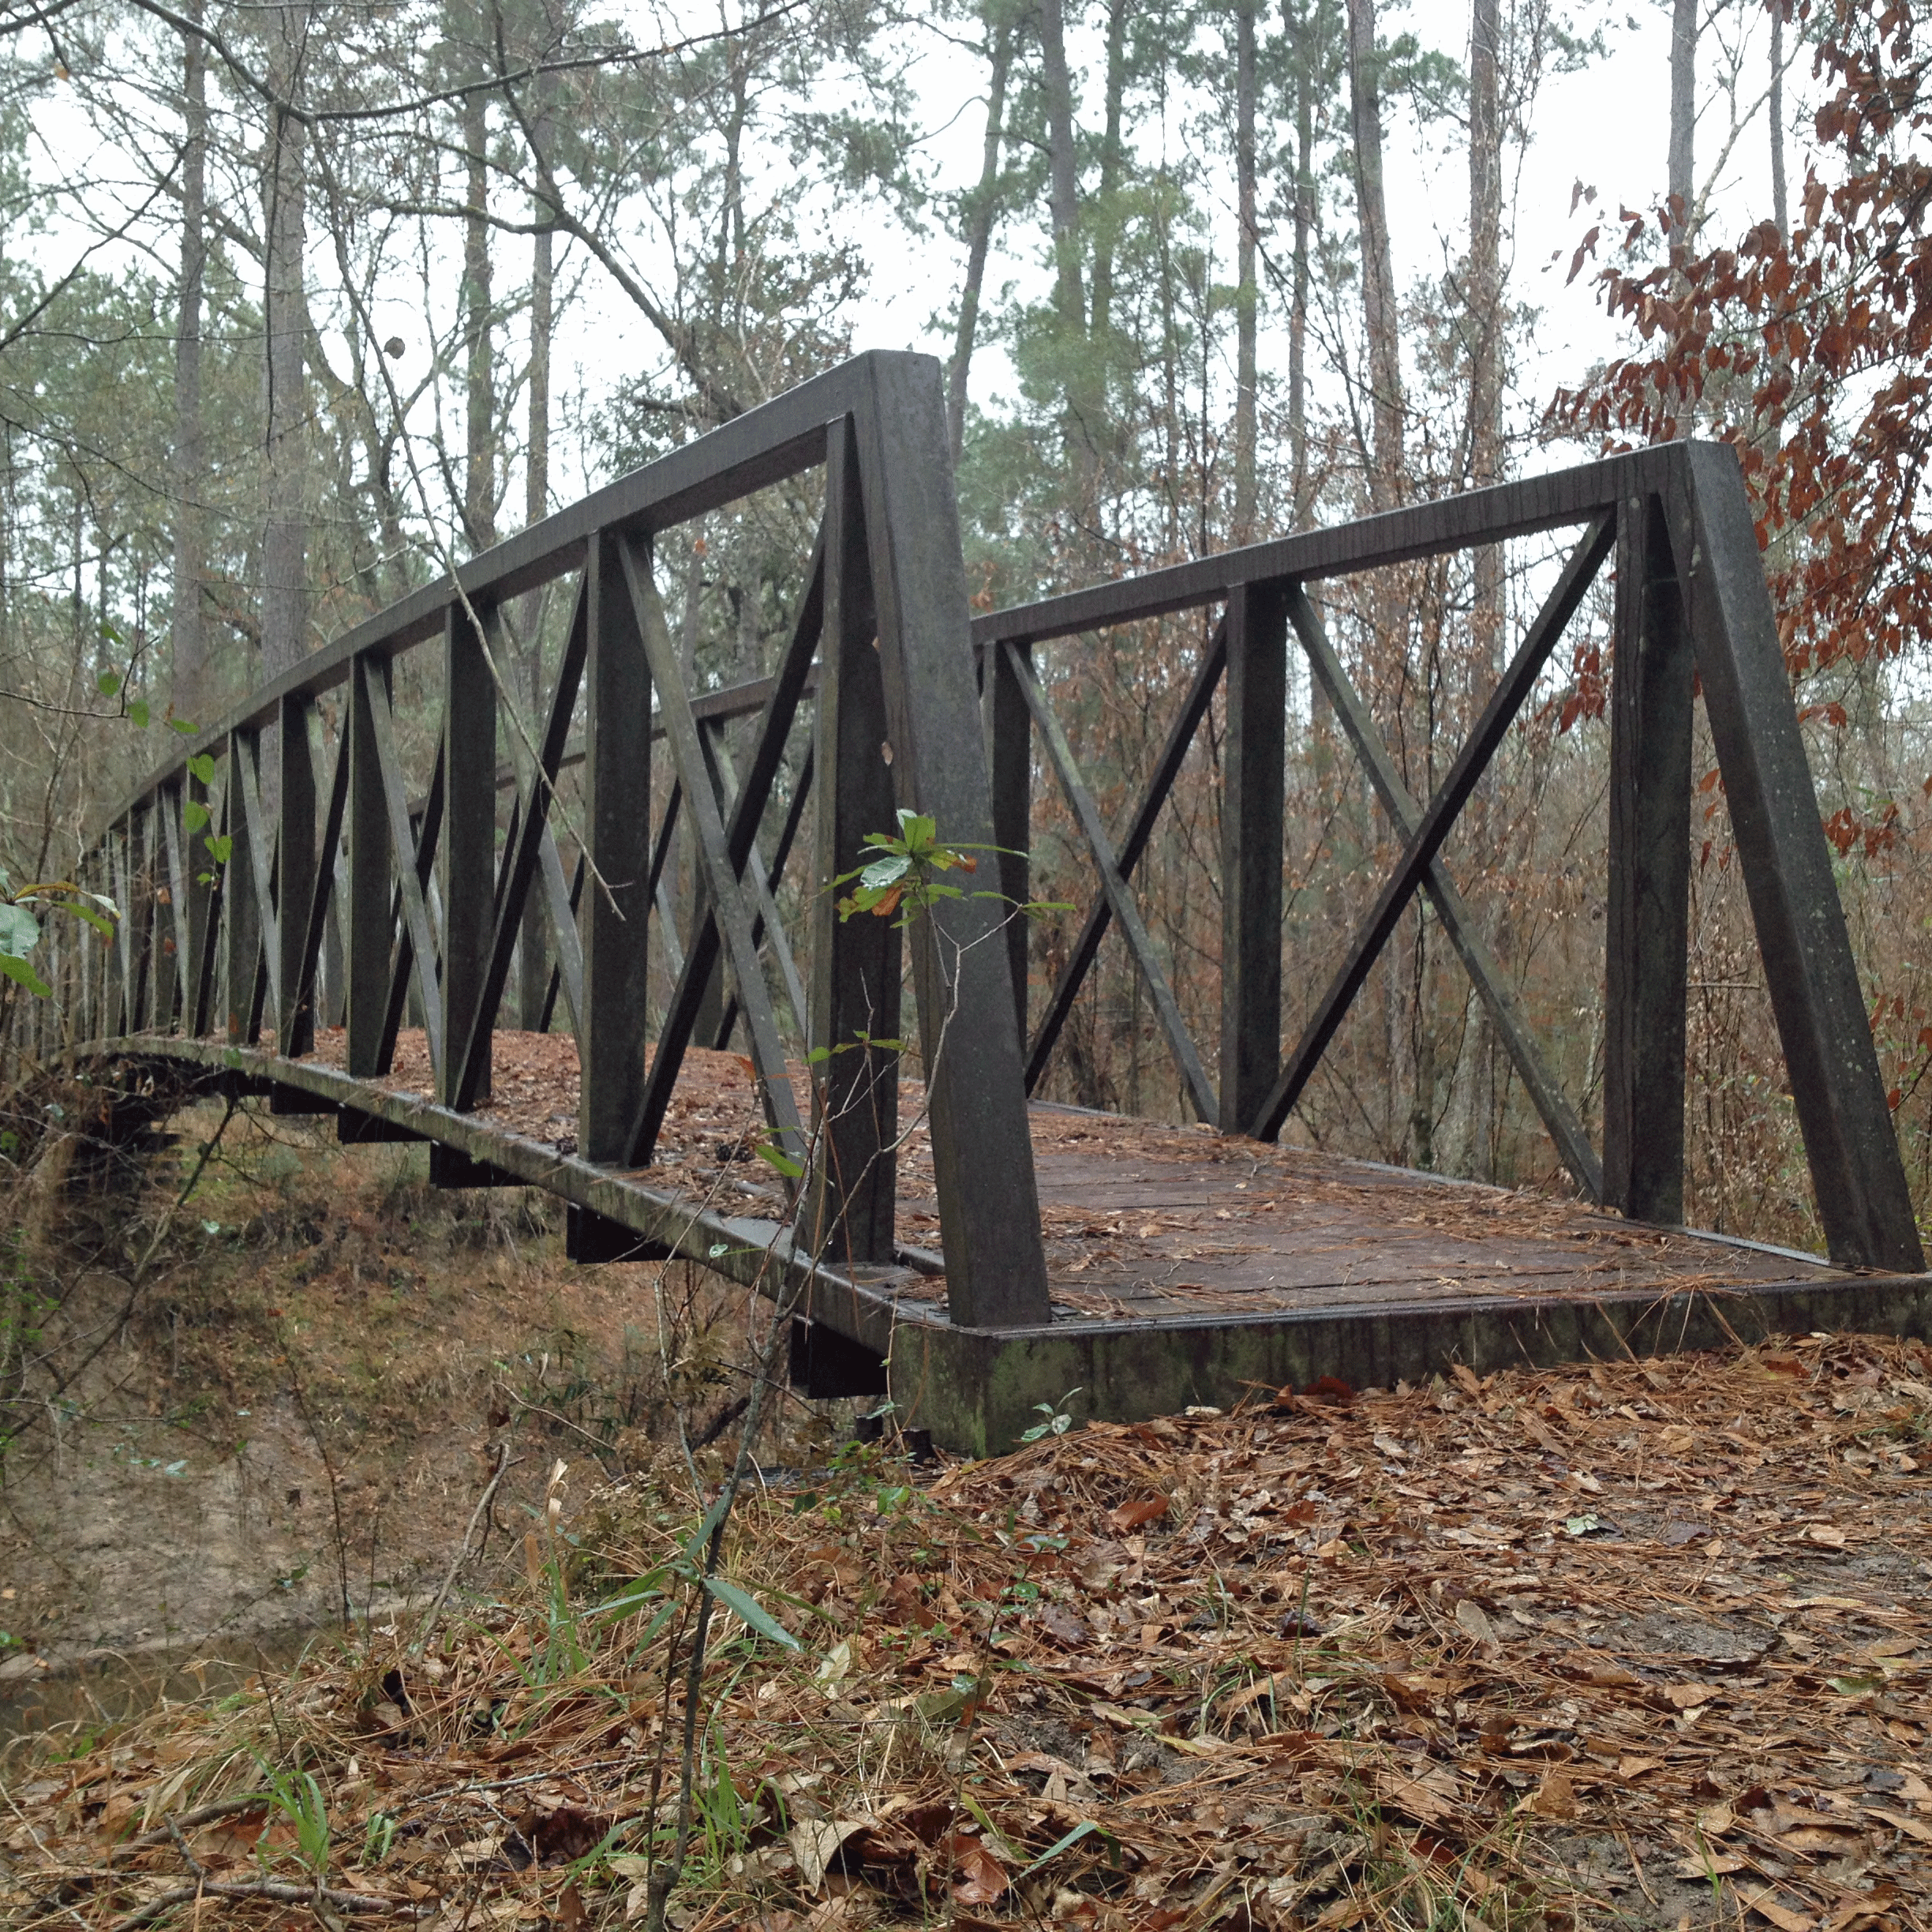 Much of the trail is muddy and damp, but this sturdy metal bridge provides dry passage for hikers